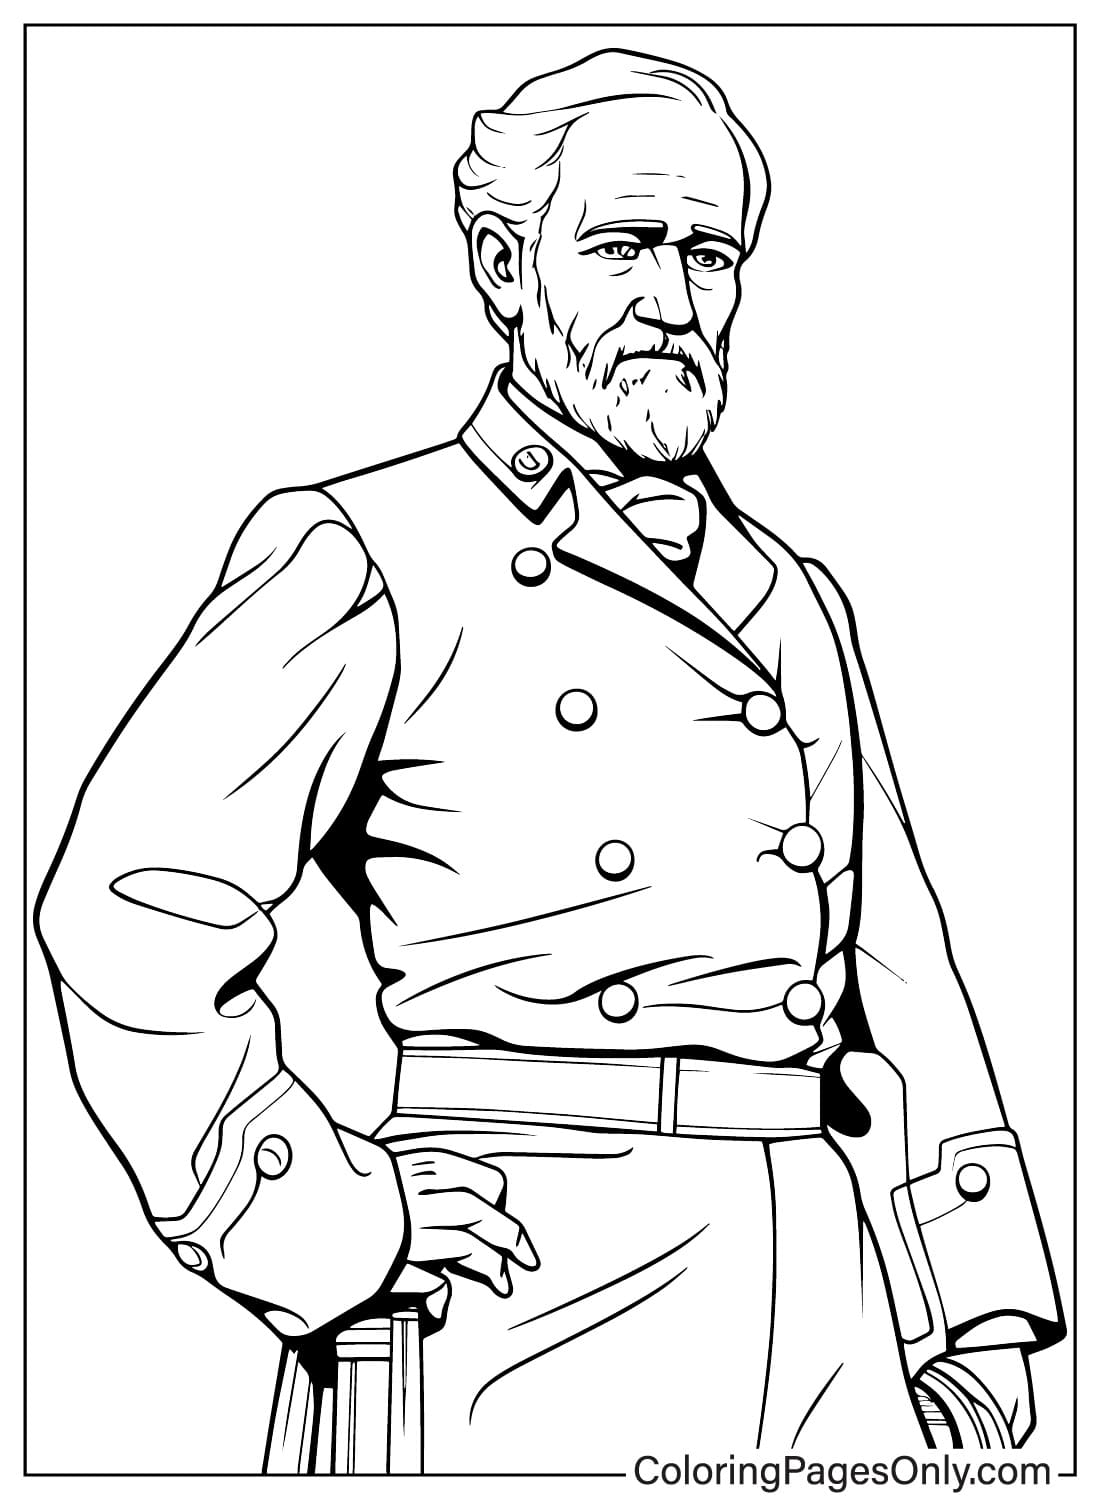 Robert E. Lee Color Page - Free Printable Coloring Pages